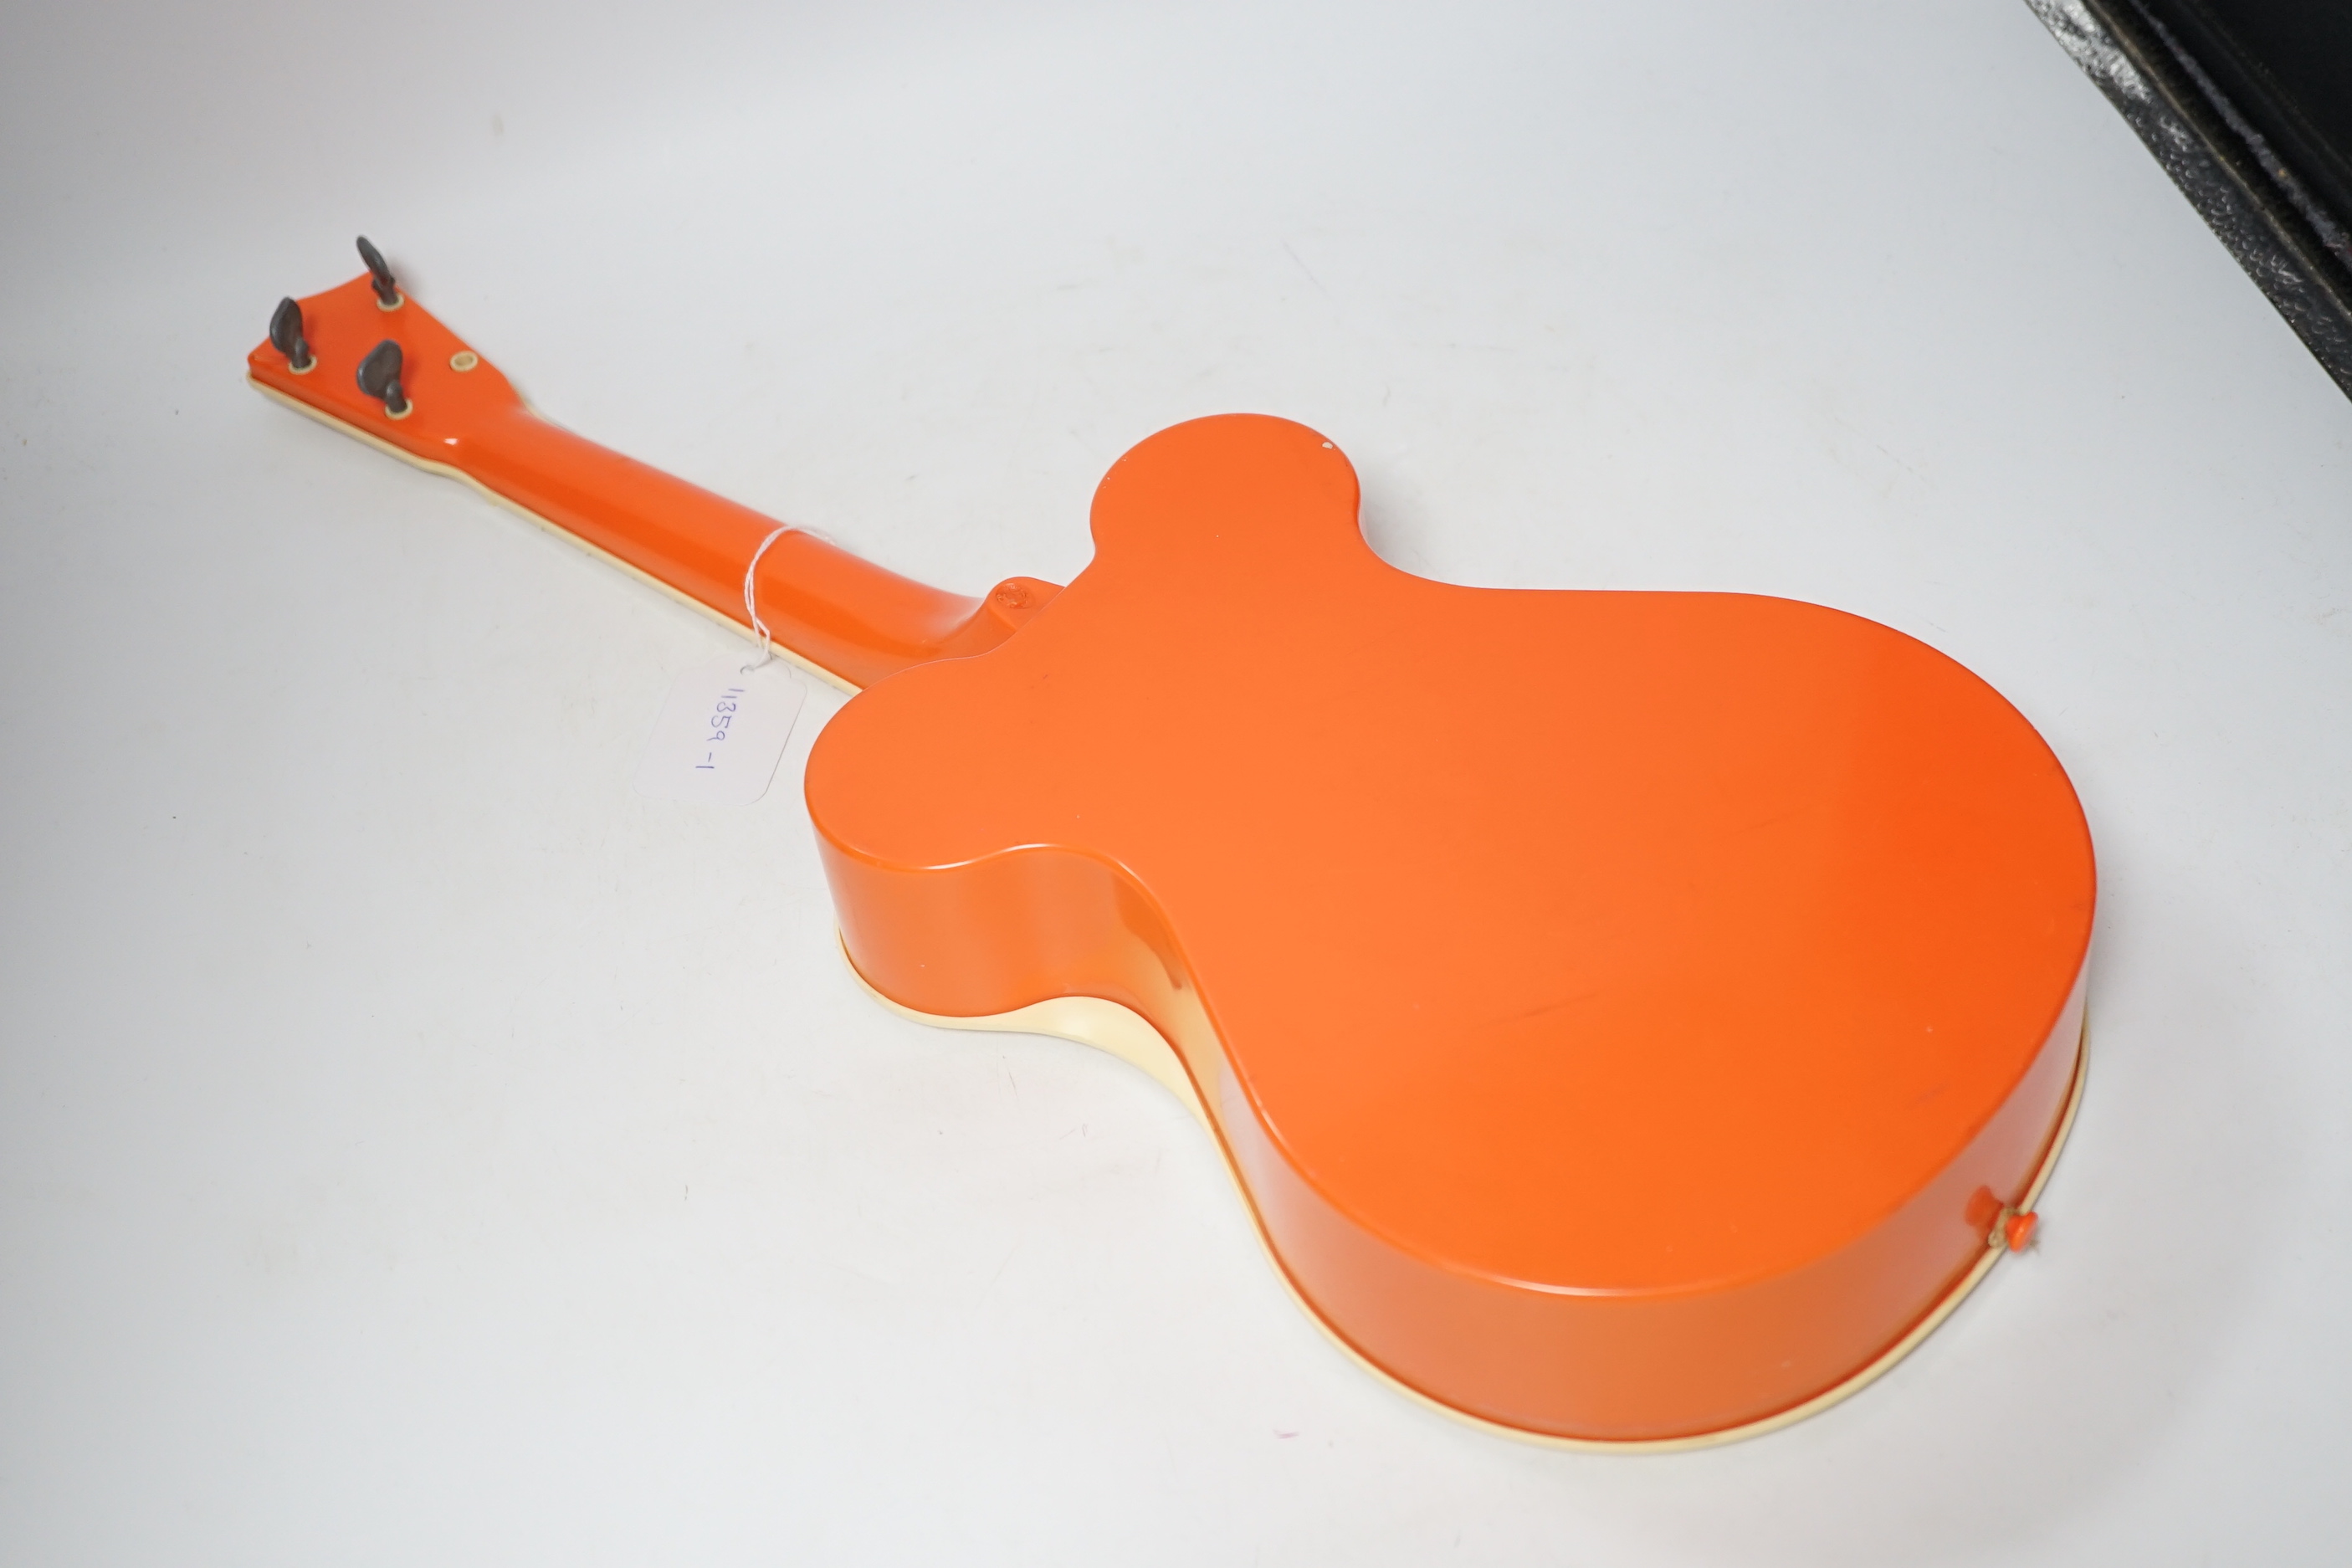 The Beatles plastic toy guitar by Selcol, 59cm